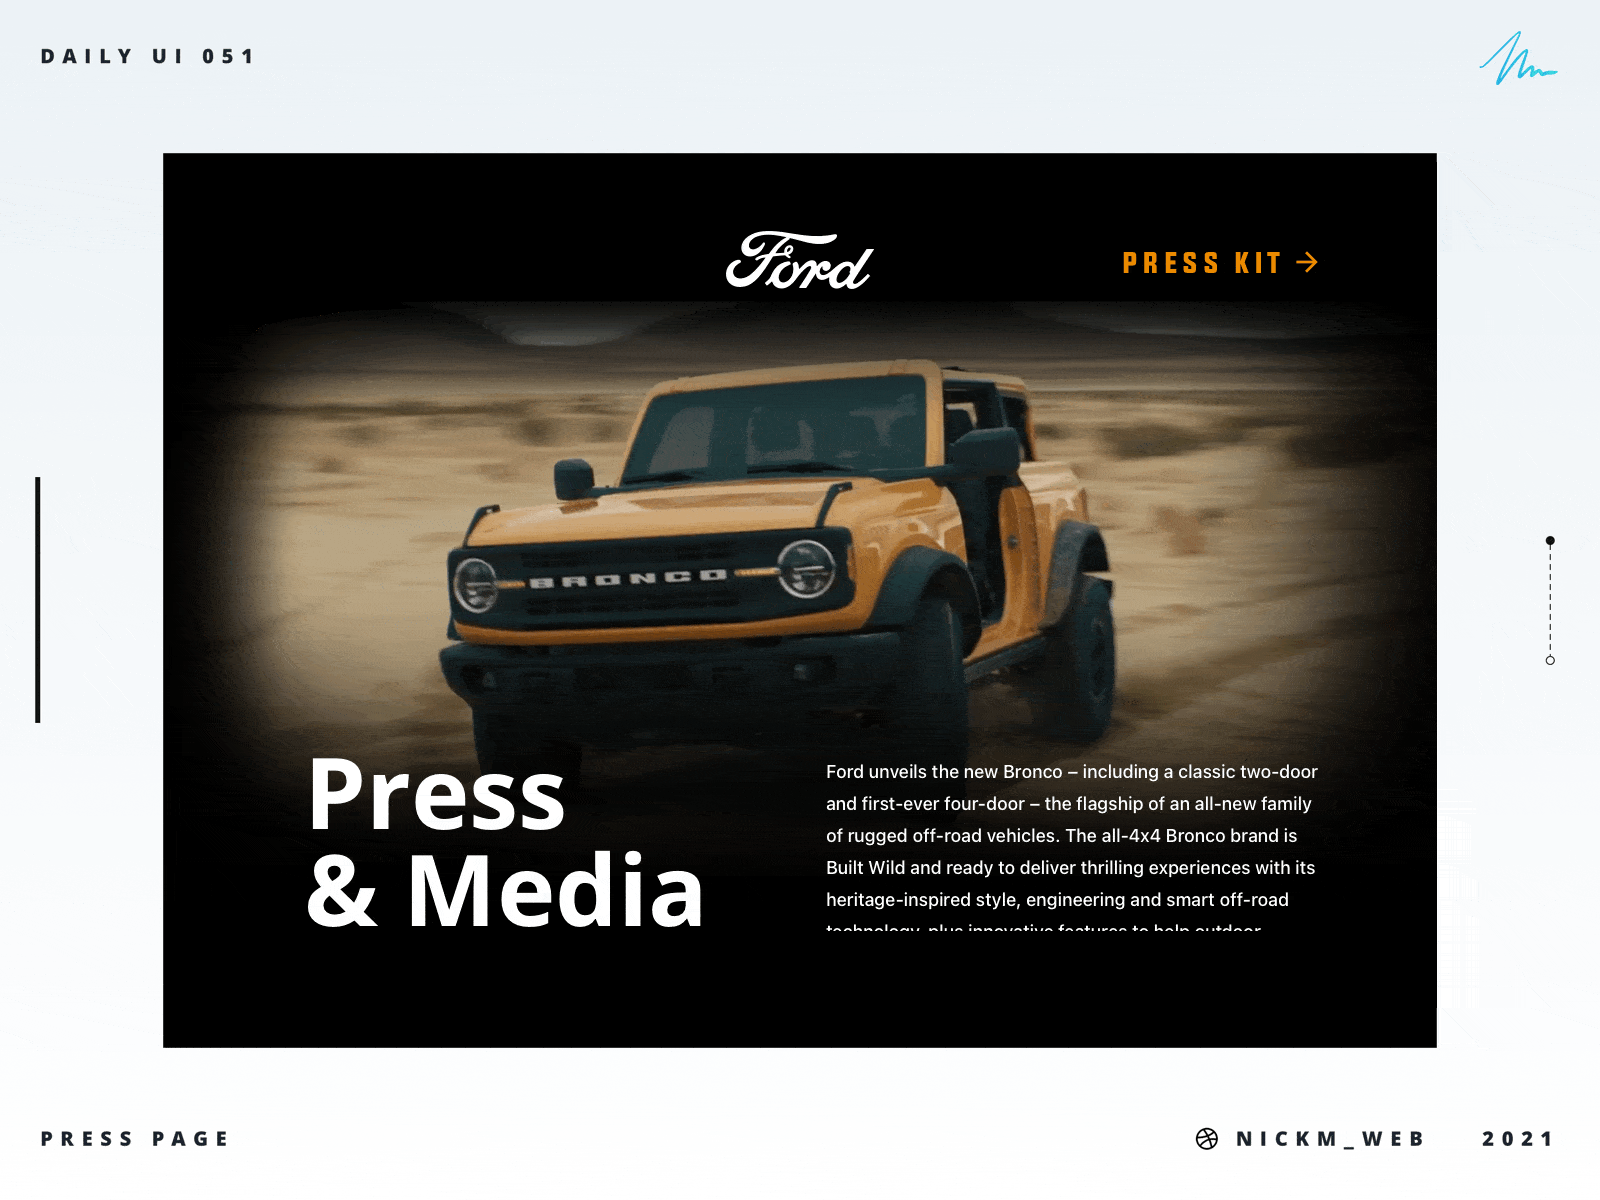 Ford Press Page | Daily UI Challenge 051 (Press Page) bronco daily daily ui daily ui 051 daily ui challenge dailyui dailyui051 dailyuichallenge ford